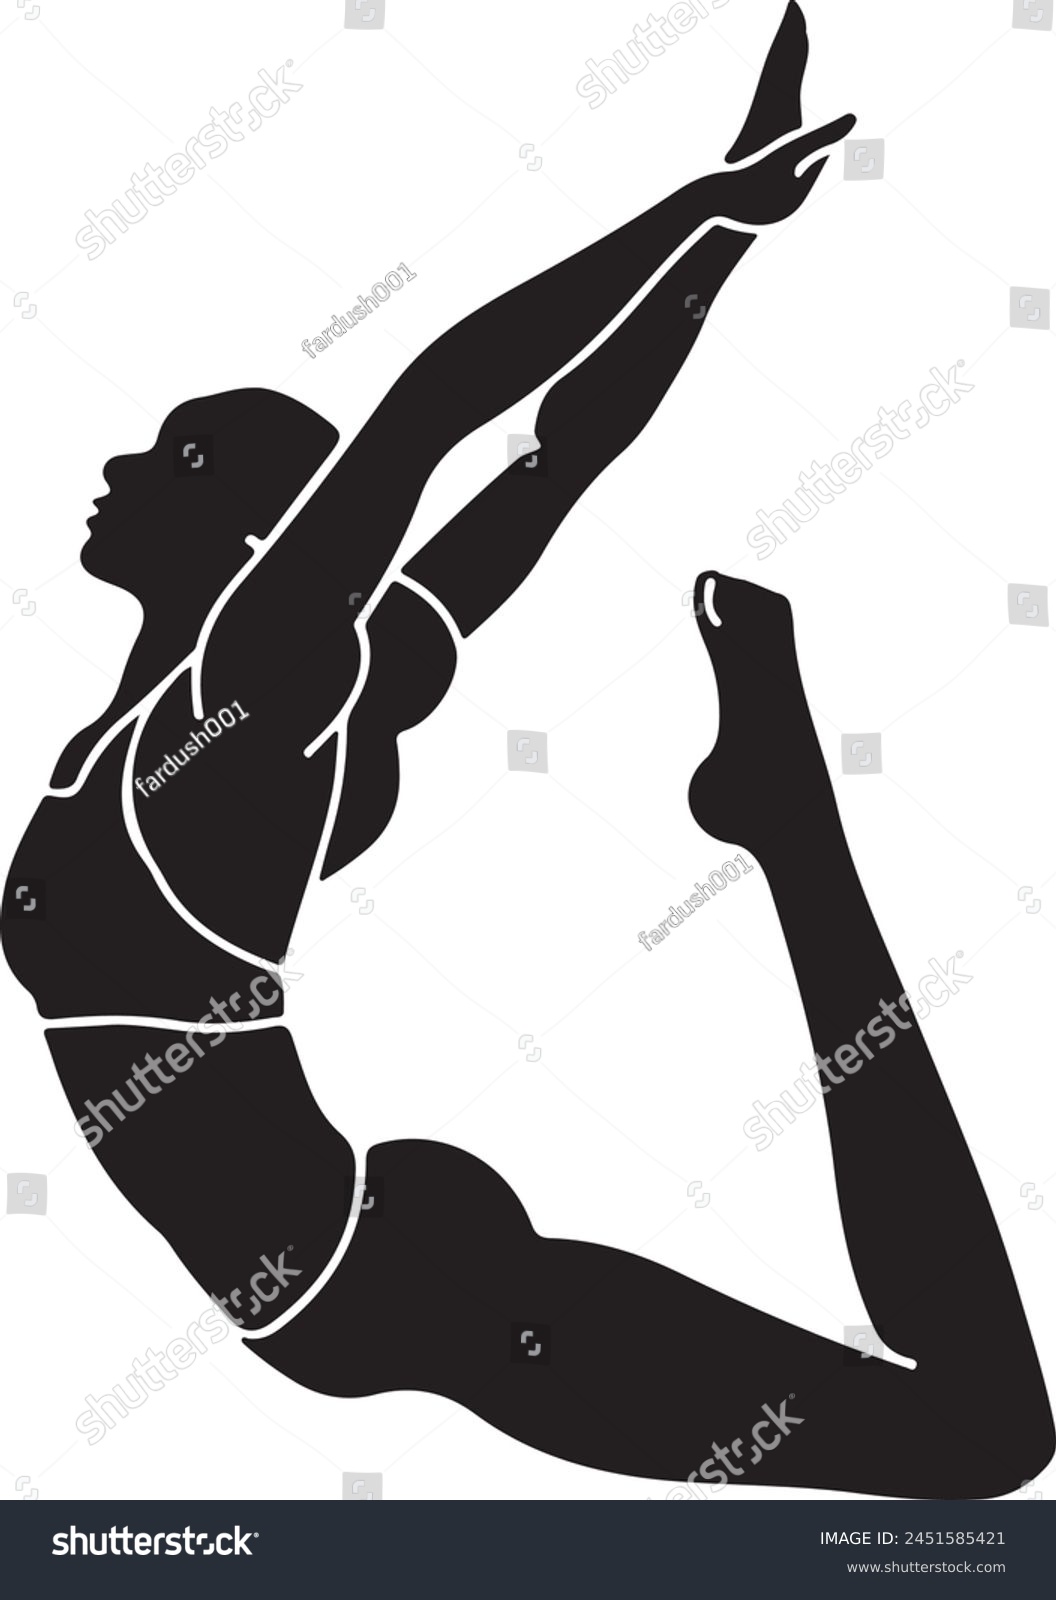 SVG of a black silhouette of a woman doing yoga svg